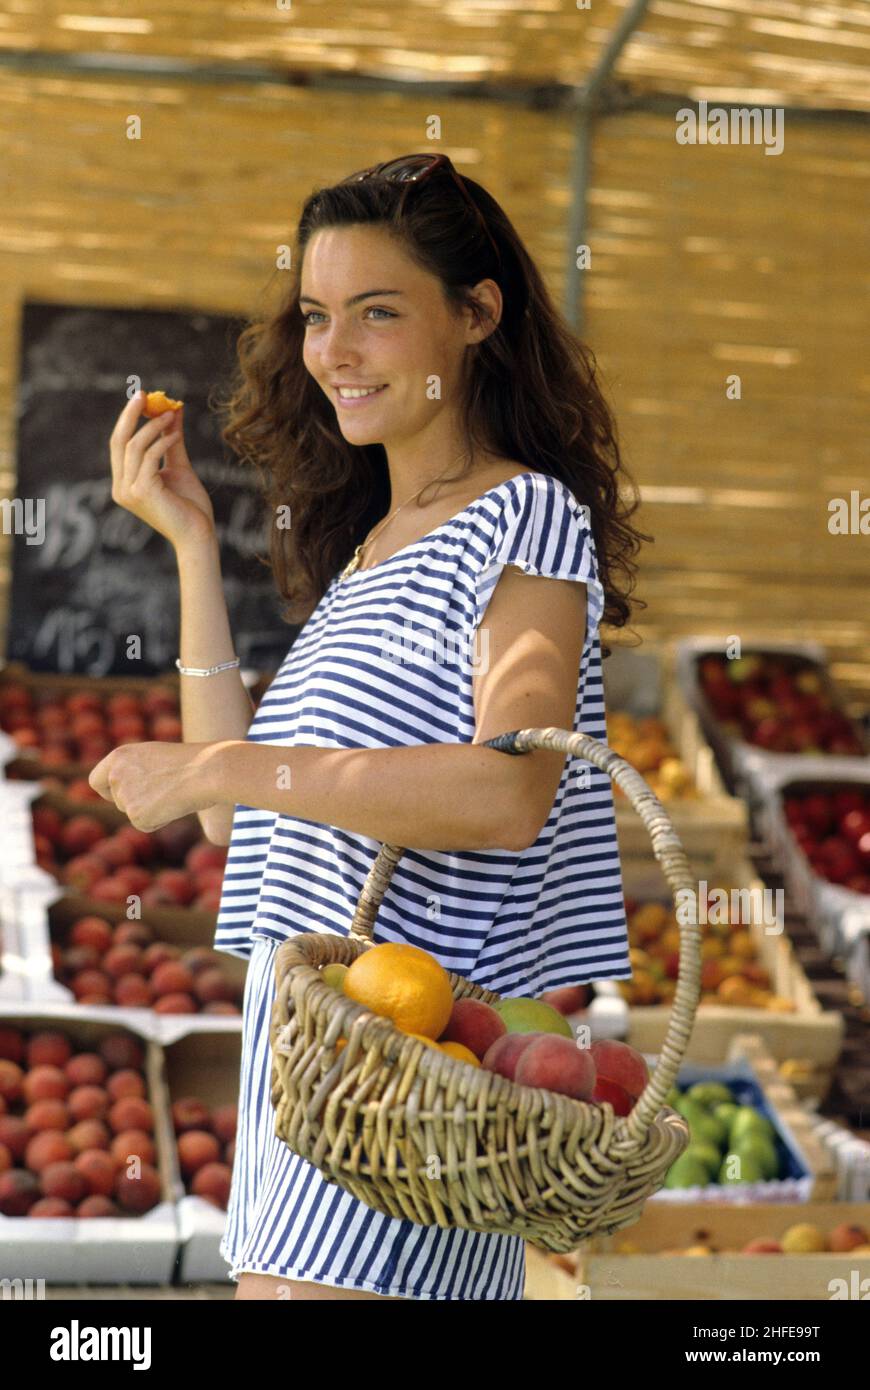 dark hair young woman happy face profil ray dressed shopping fruits market natural light Stock Photo